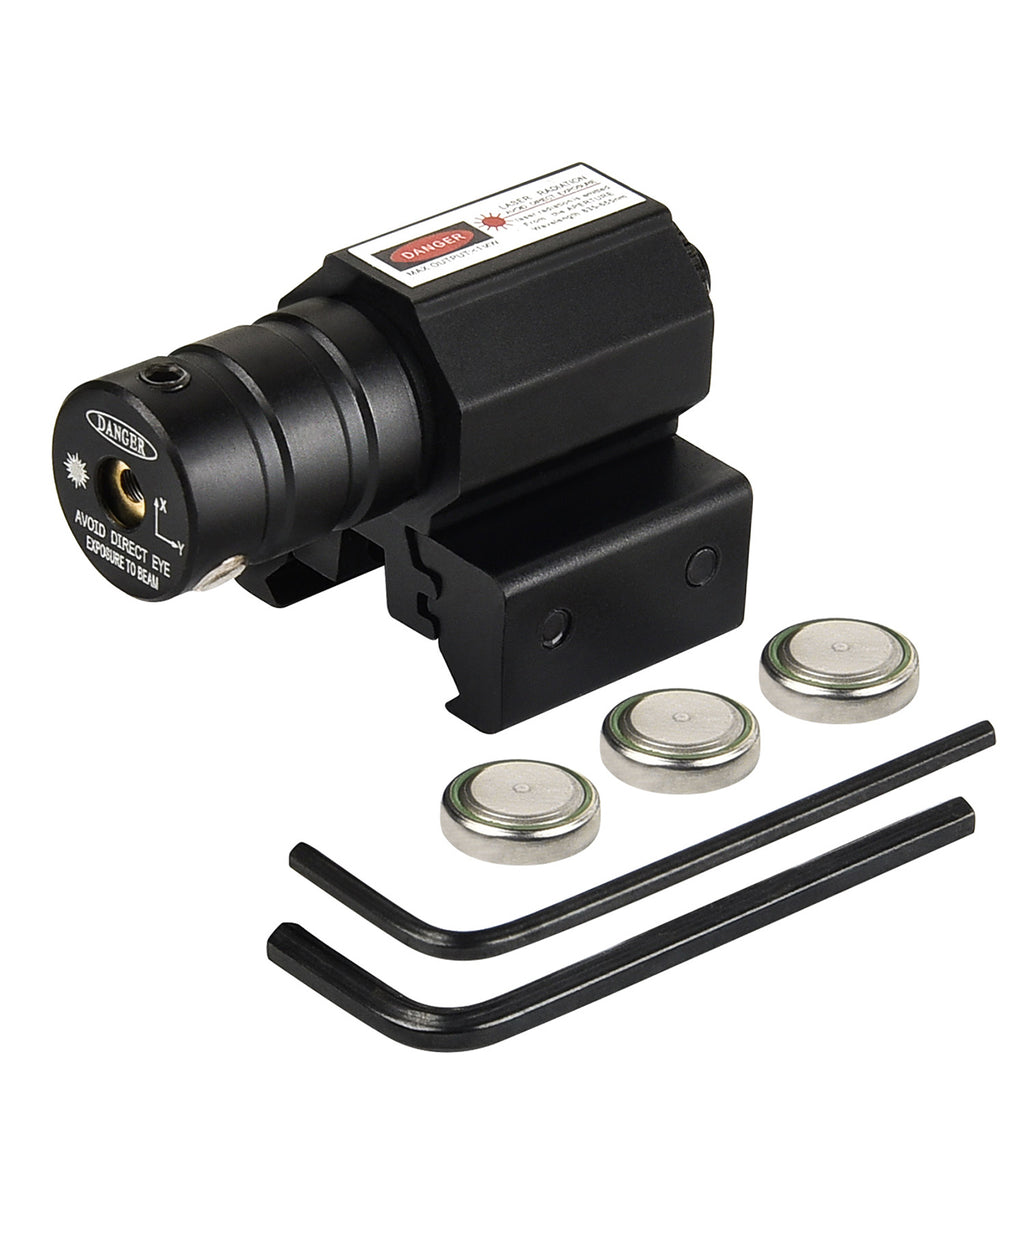 EZshoot Compact Tactical Red Laser Sight with Picatinny Rail Mount for 11mm/21mm Rail